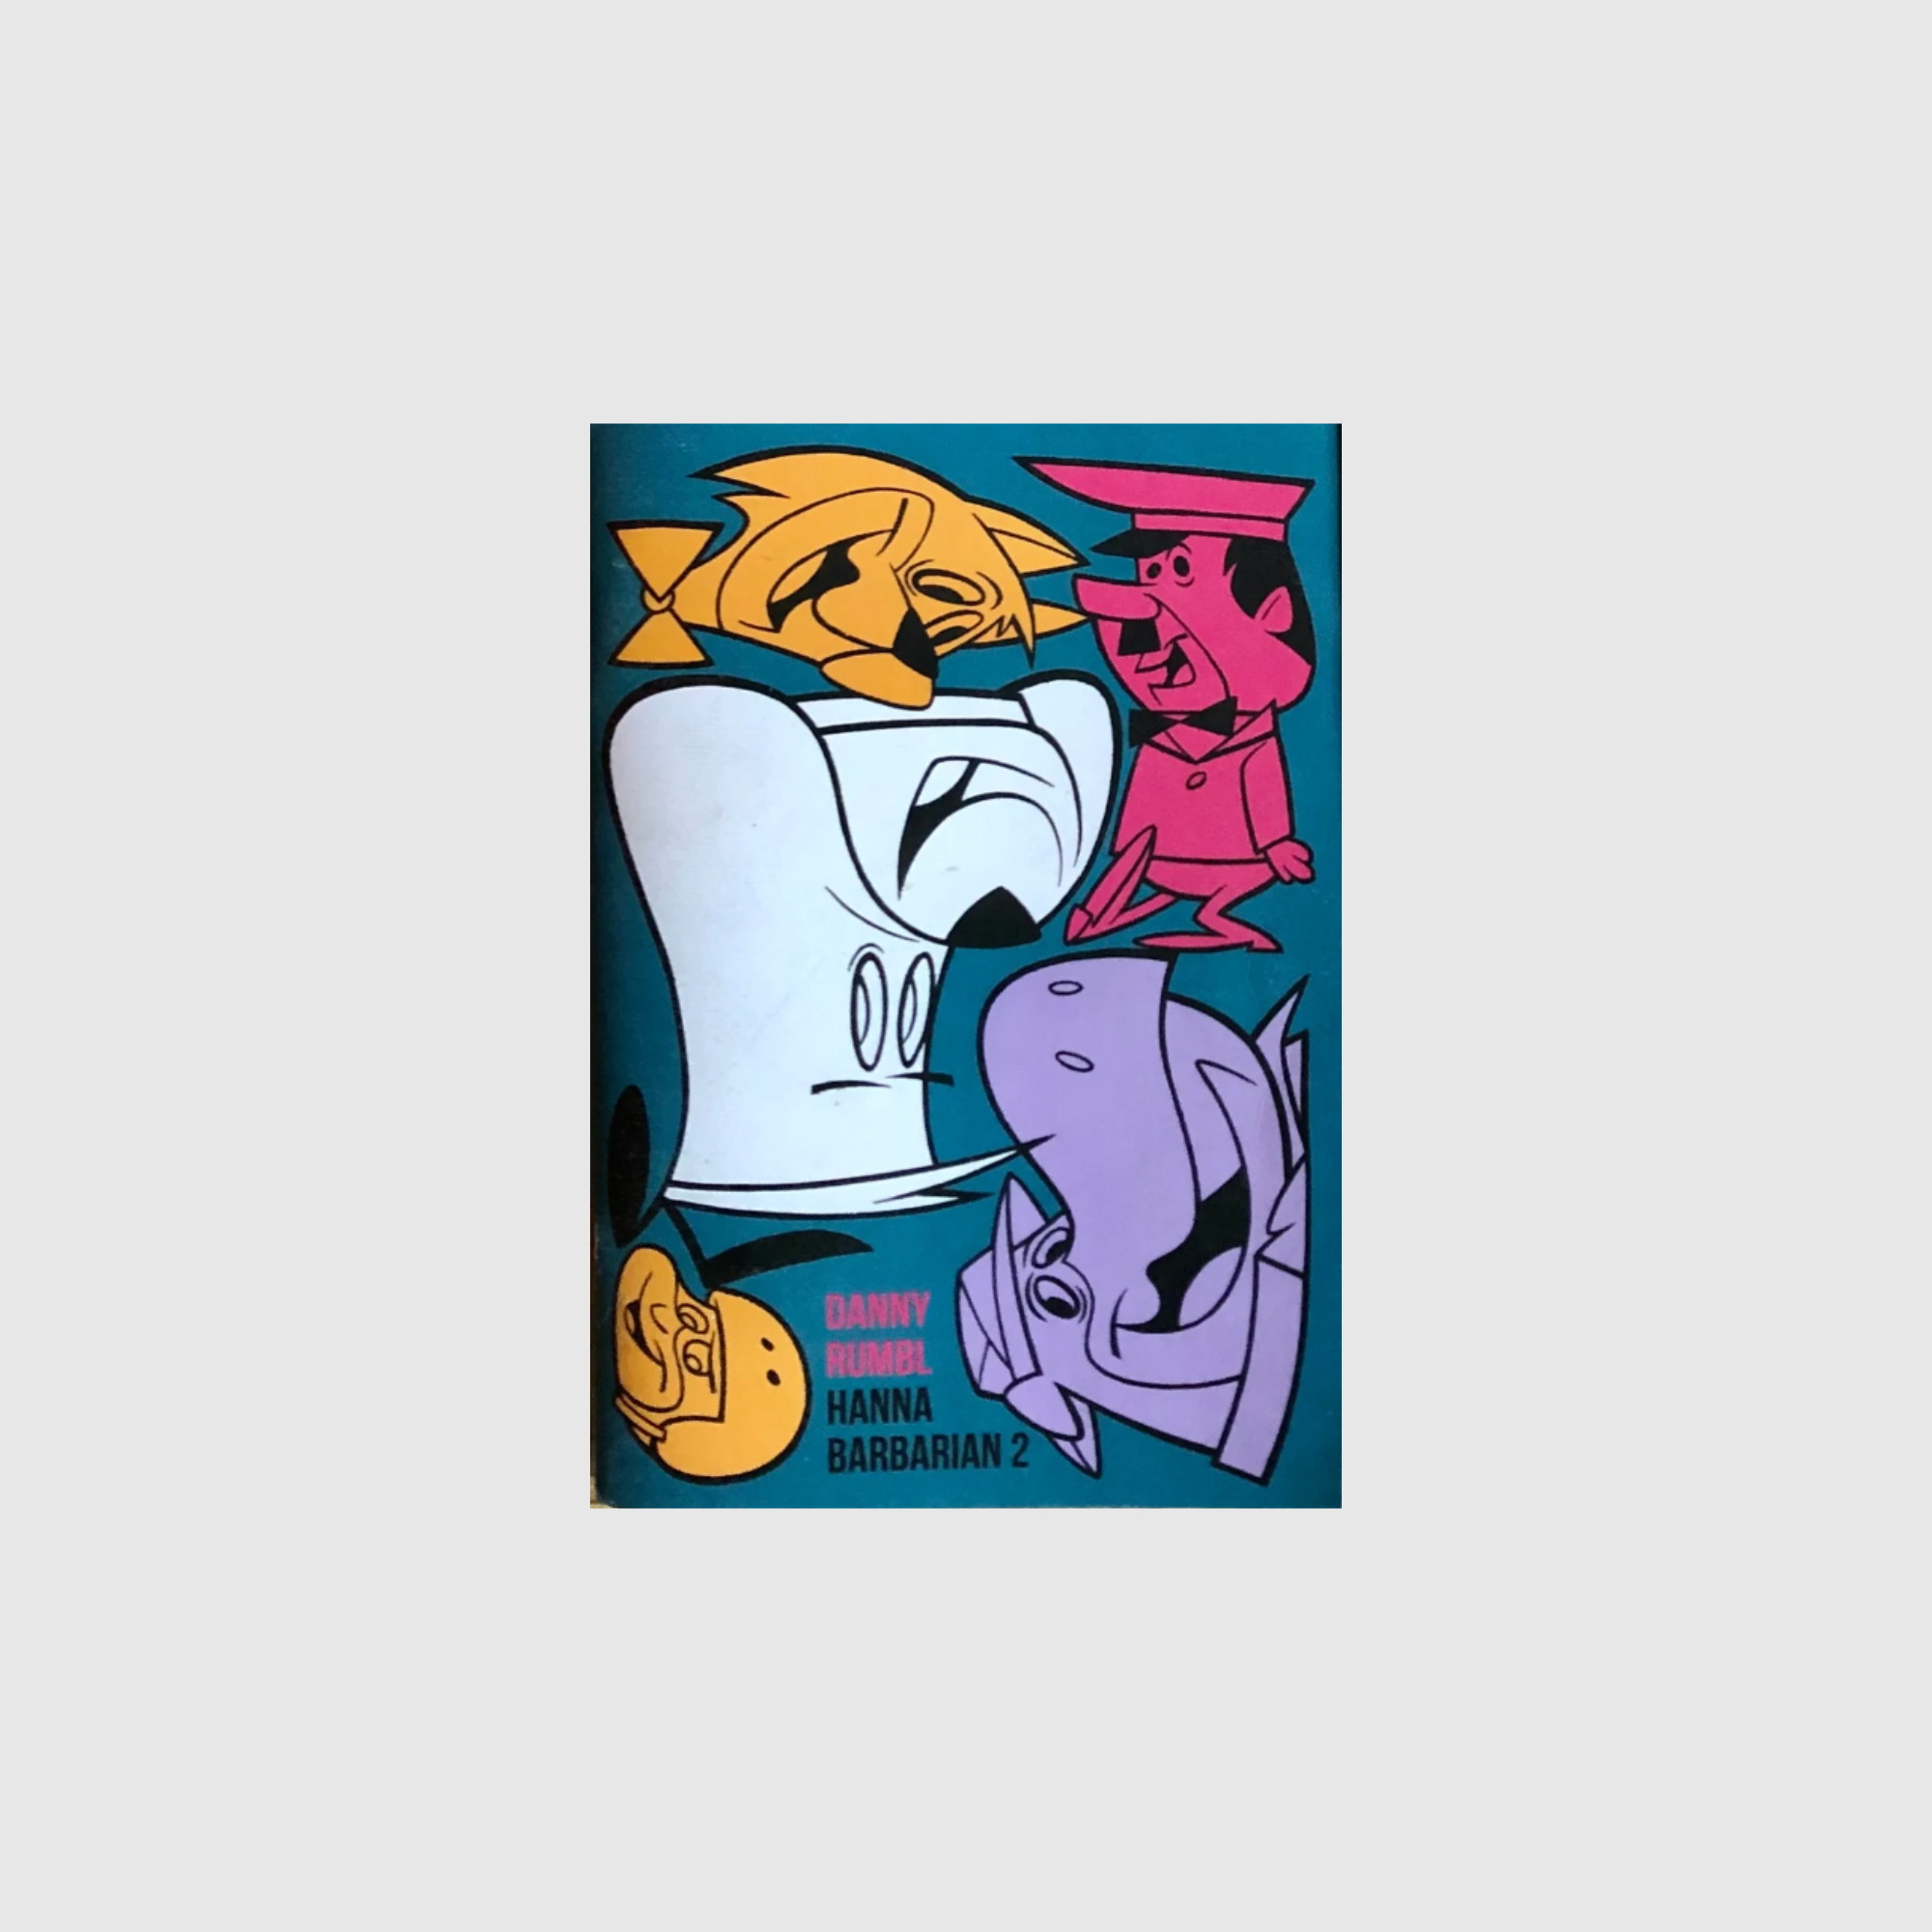 Cover of the book/zine 'Hanna Barbarian II' by Danny Rumbl. The artwork features stylized, colorful cartoon characters inspired by Hanna-Barbera cartoons, including a yellow fish, a pink man in a uniform, a white ghost-like figure, a purple hippo, and a yellow character with a helmet, all set against a blue background.